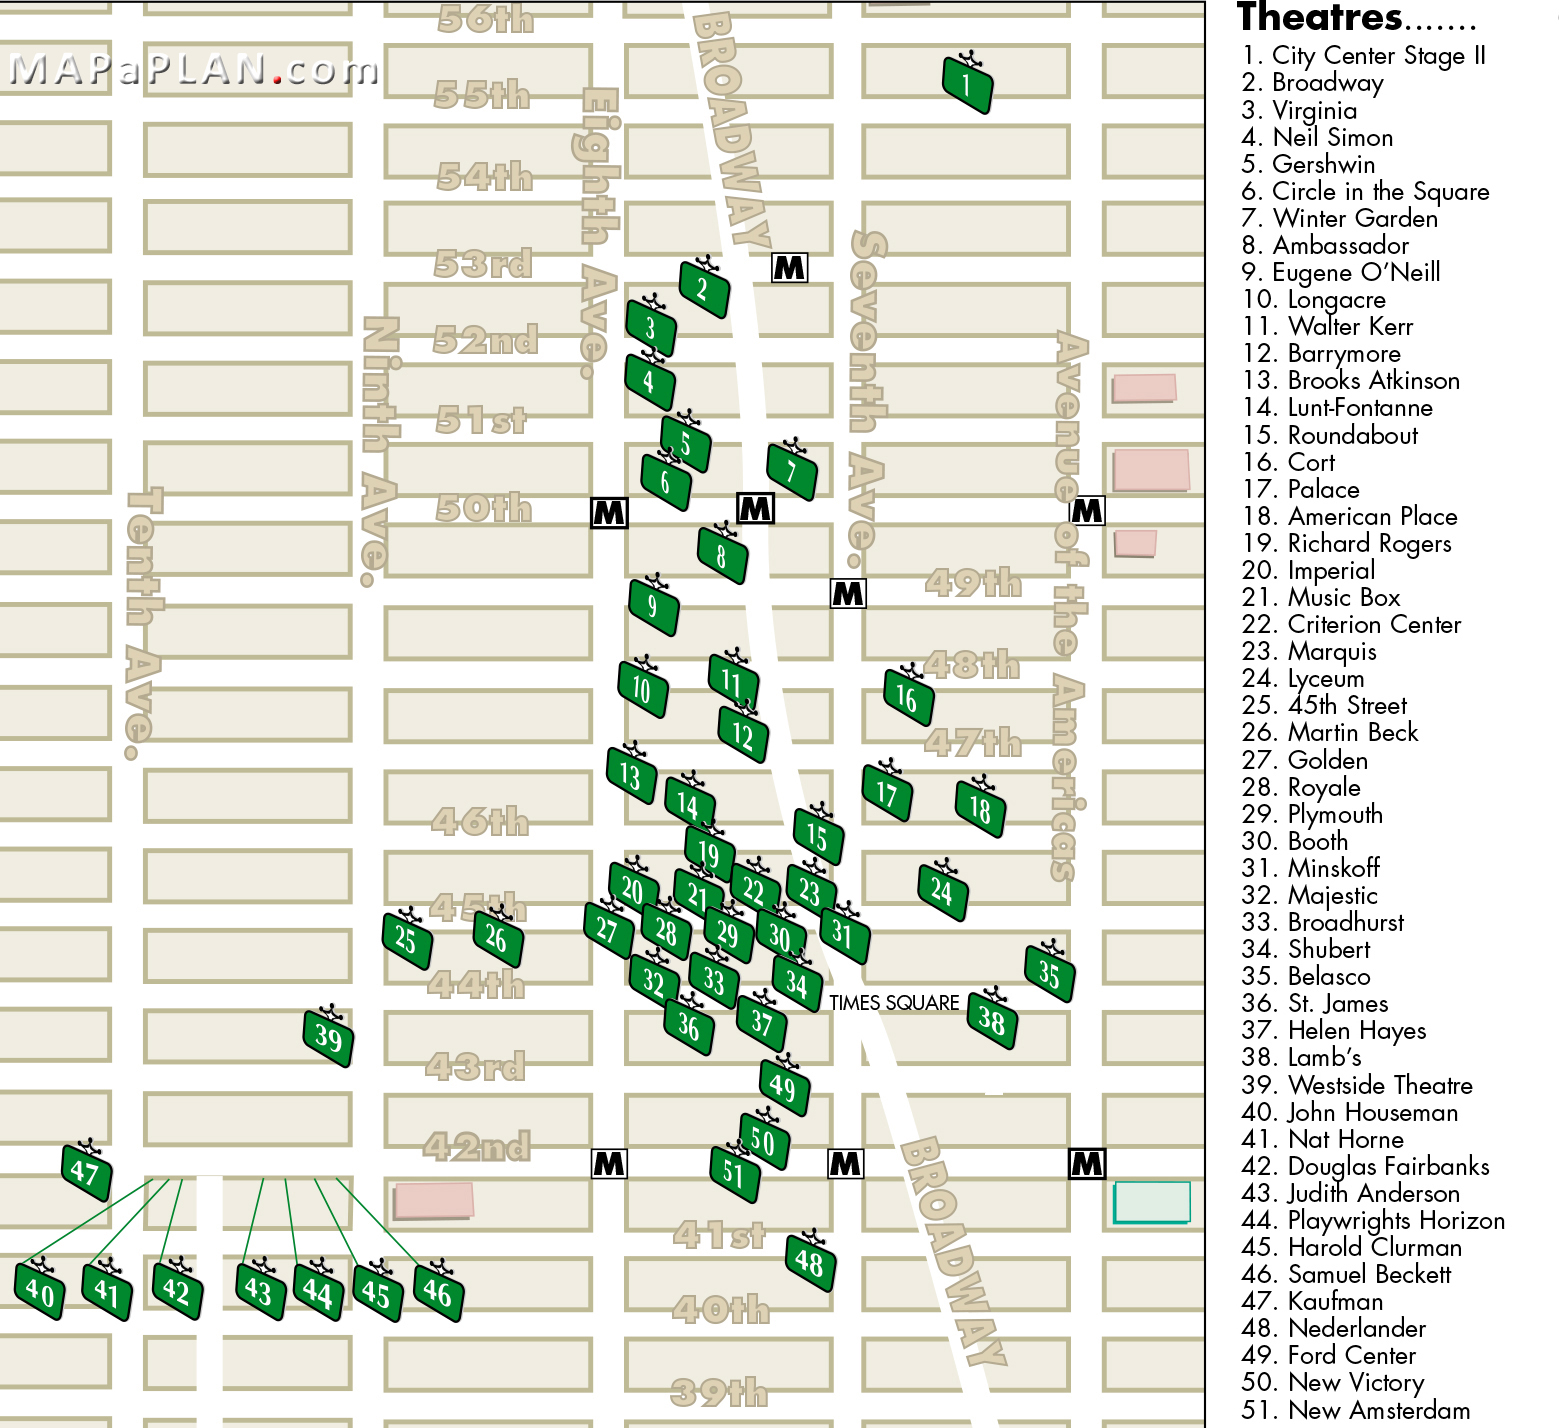 theatres-district-broadway-off-broadway-off-off-broadway-new-york-top-tourist-attractions-map